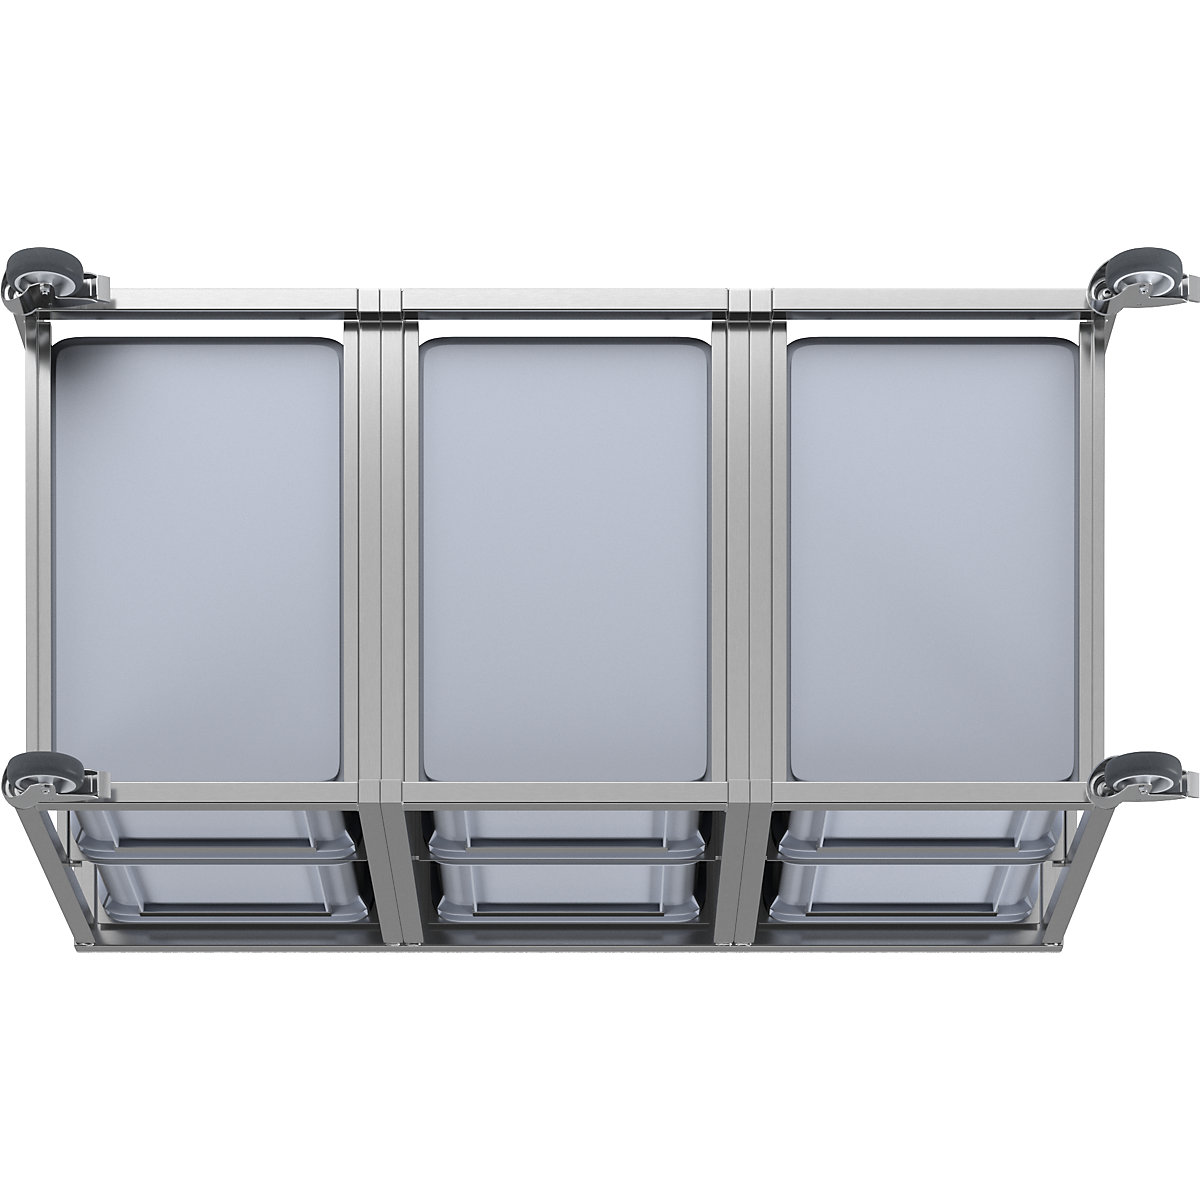 Stainless steel container trolley (Product illustration 4)-3